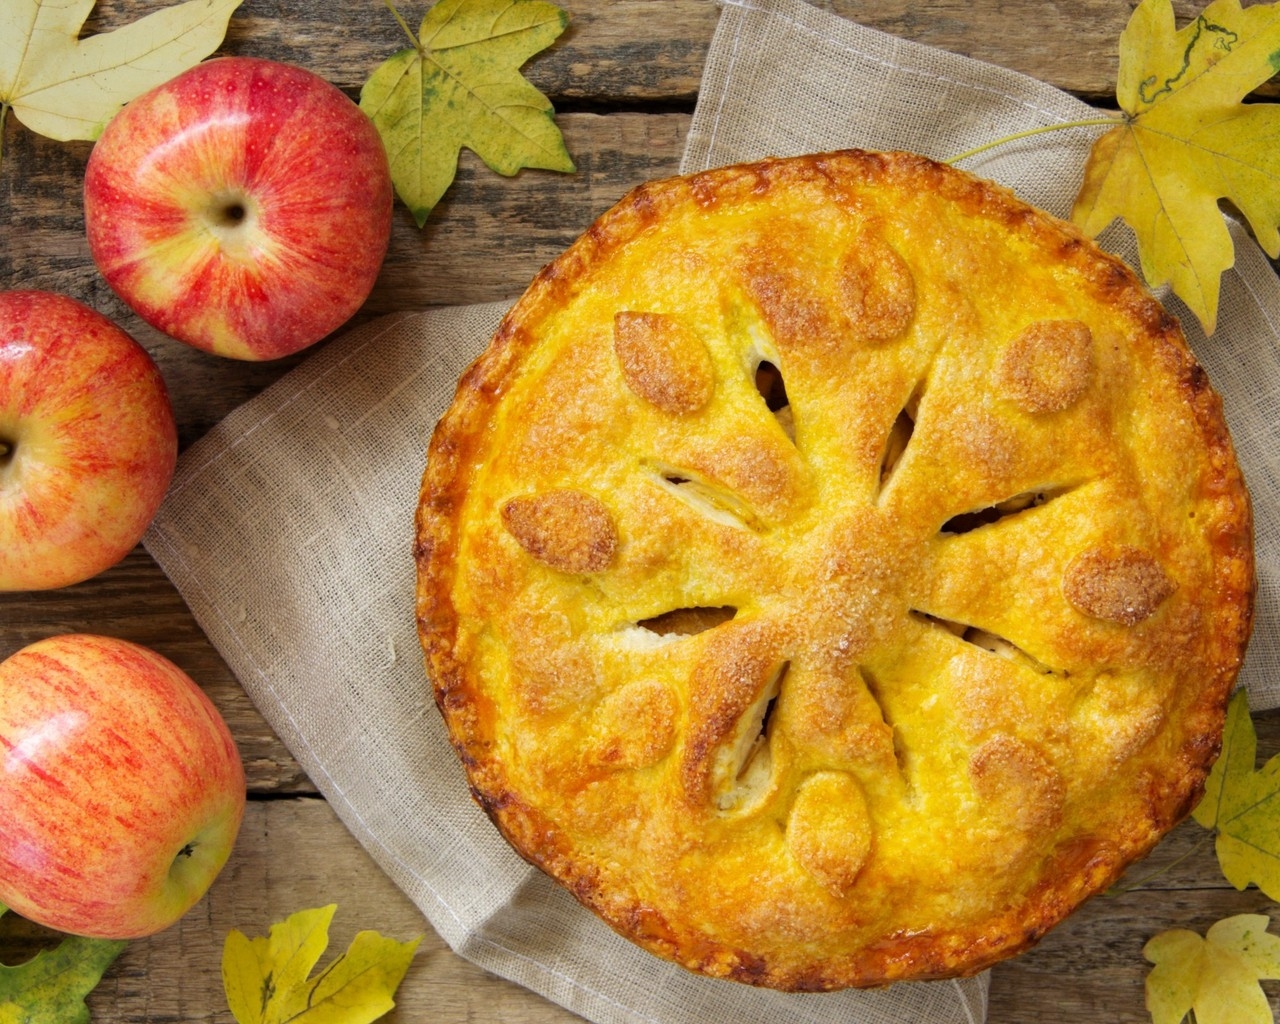 Apple Pie for 1280 x 1024 resolution